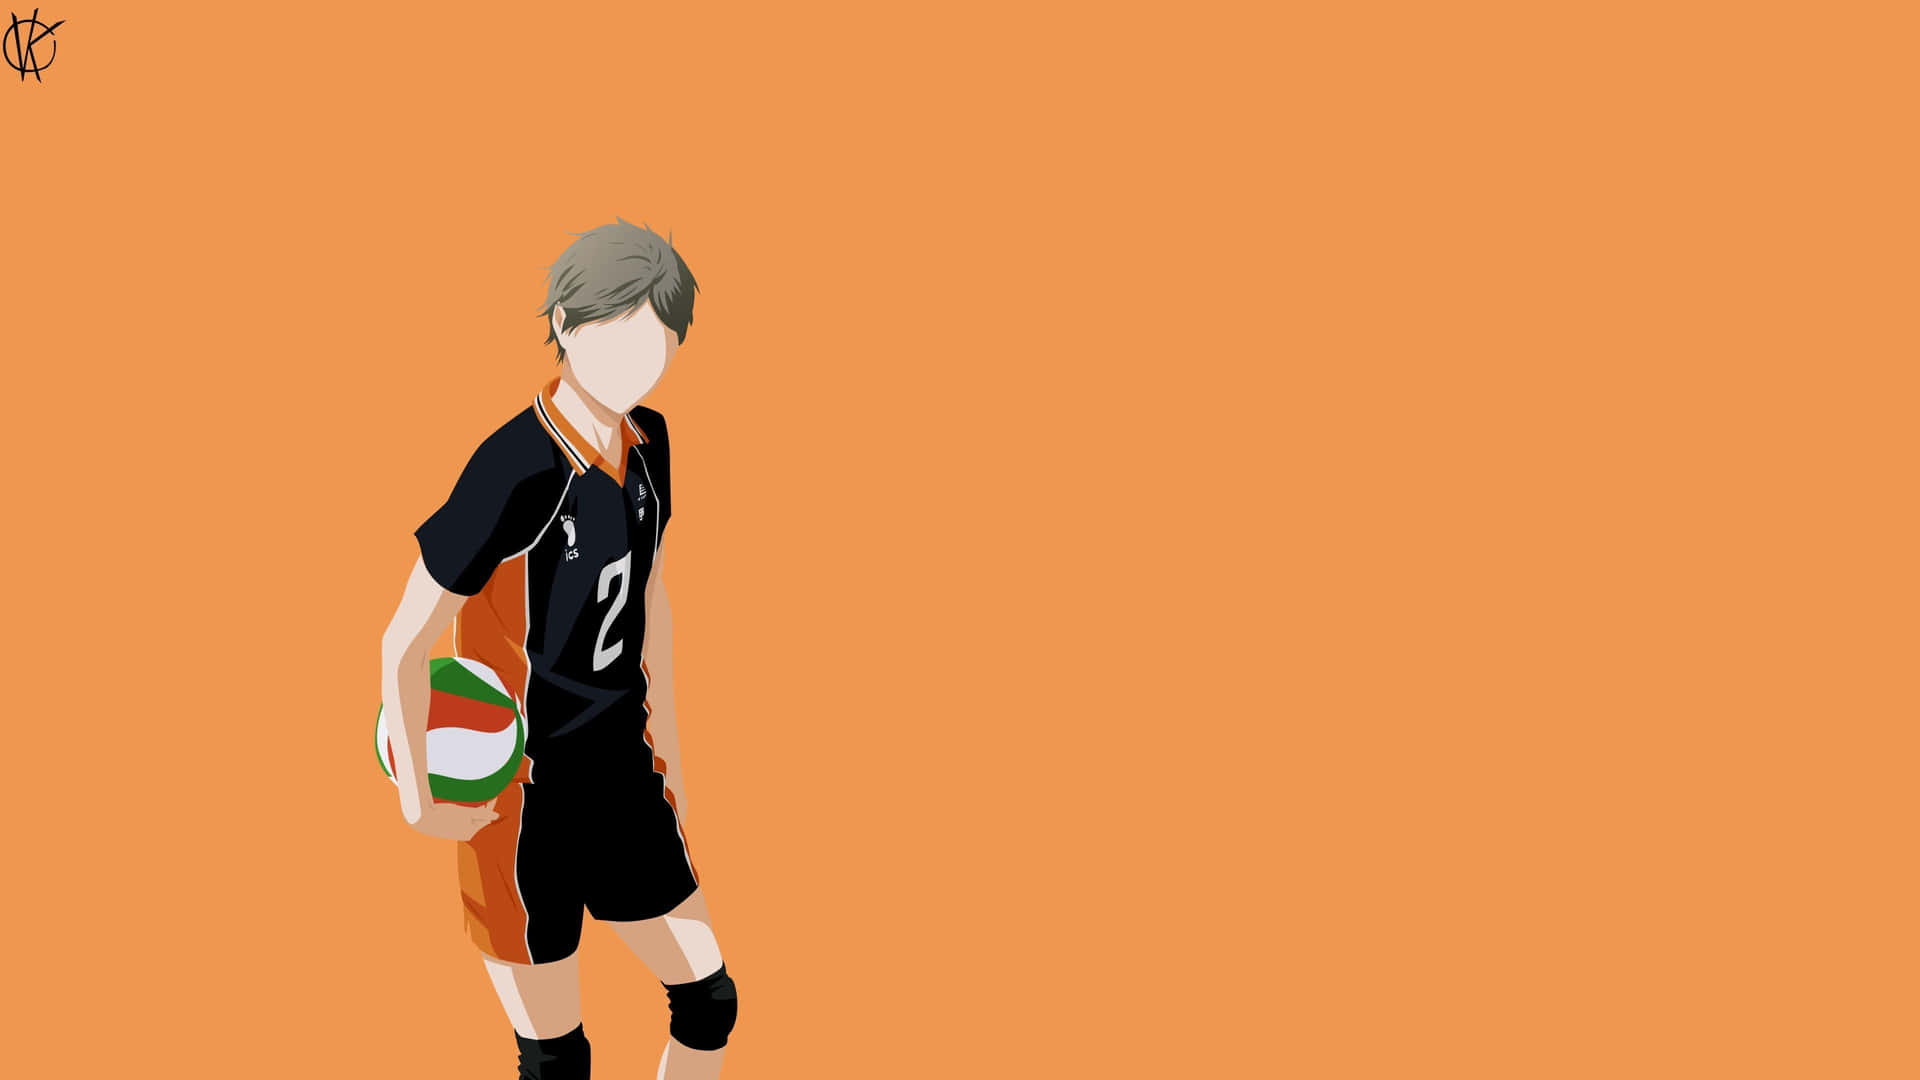 A Laptop Featuring The Haikyuu Anime Series, Perfect For Any Fan Of The Show. Background